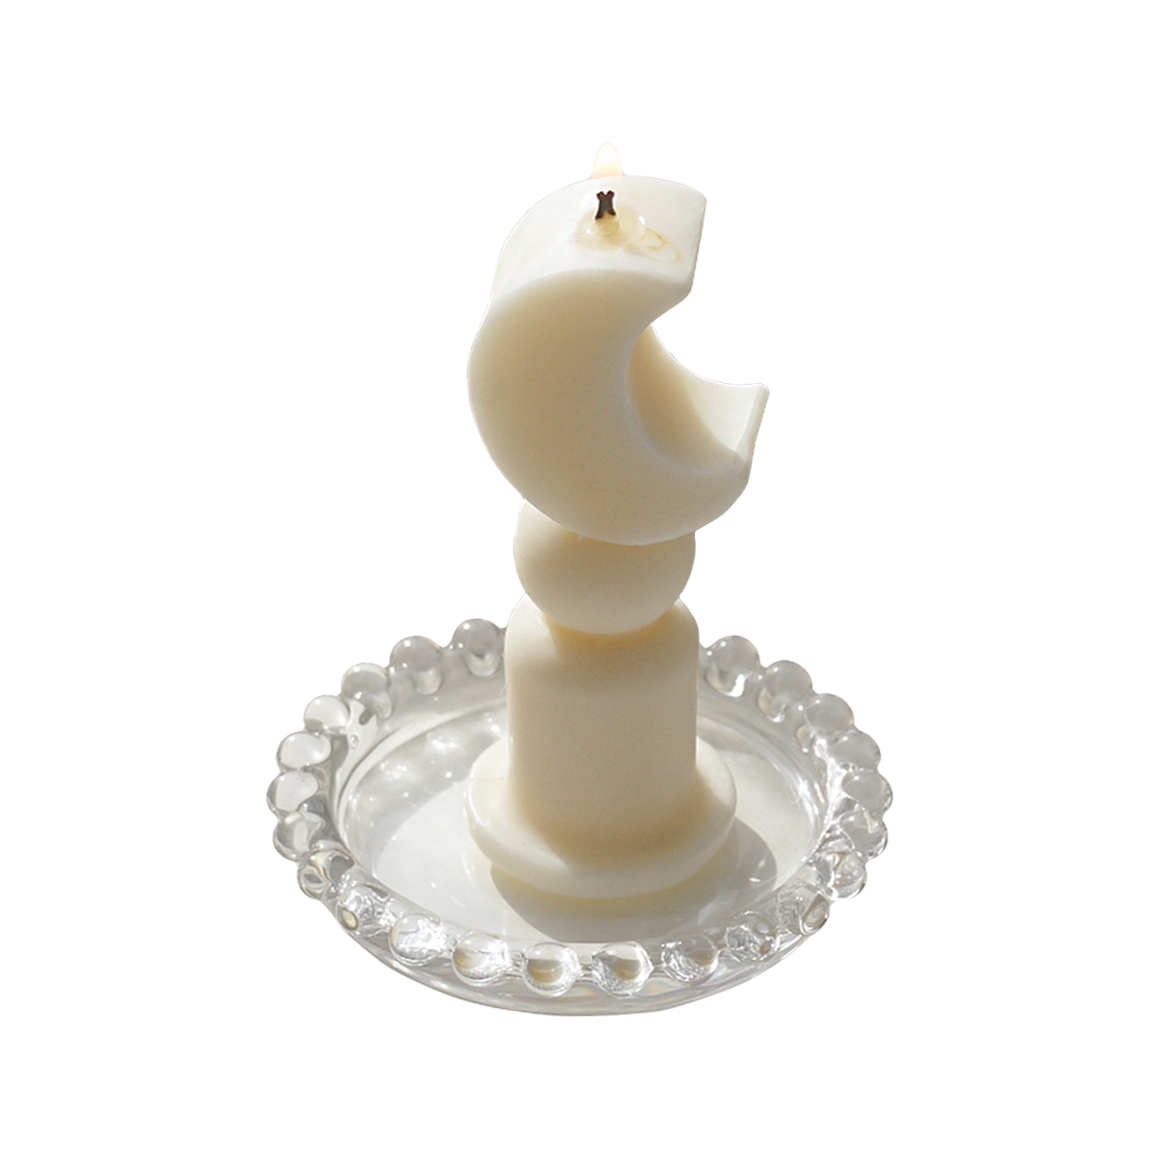 a lit dreamy aesthetic crescent moon shaped soy pillar candle on a clear beaded round tray